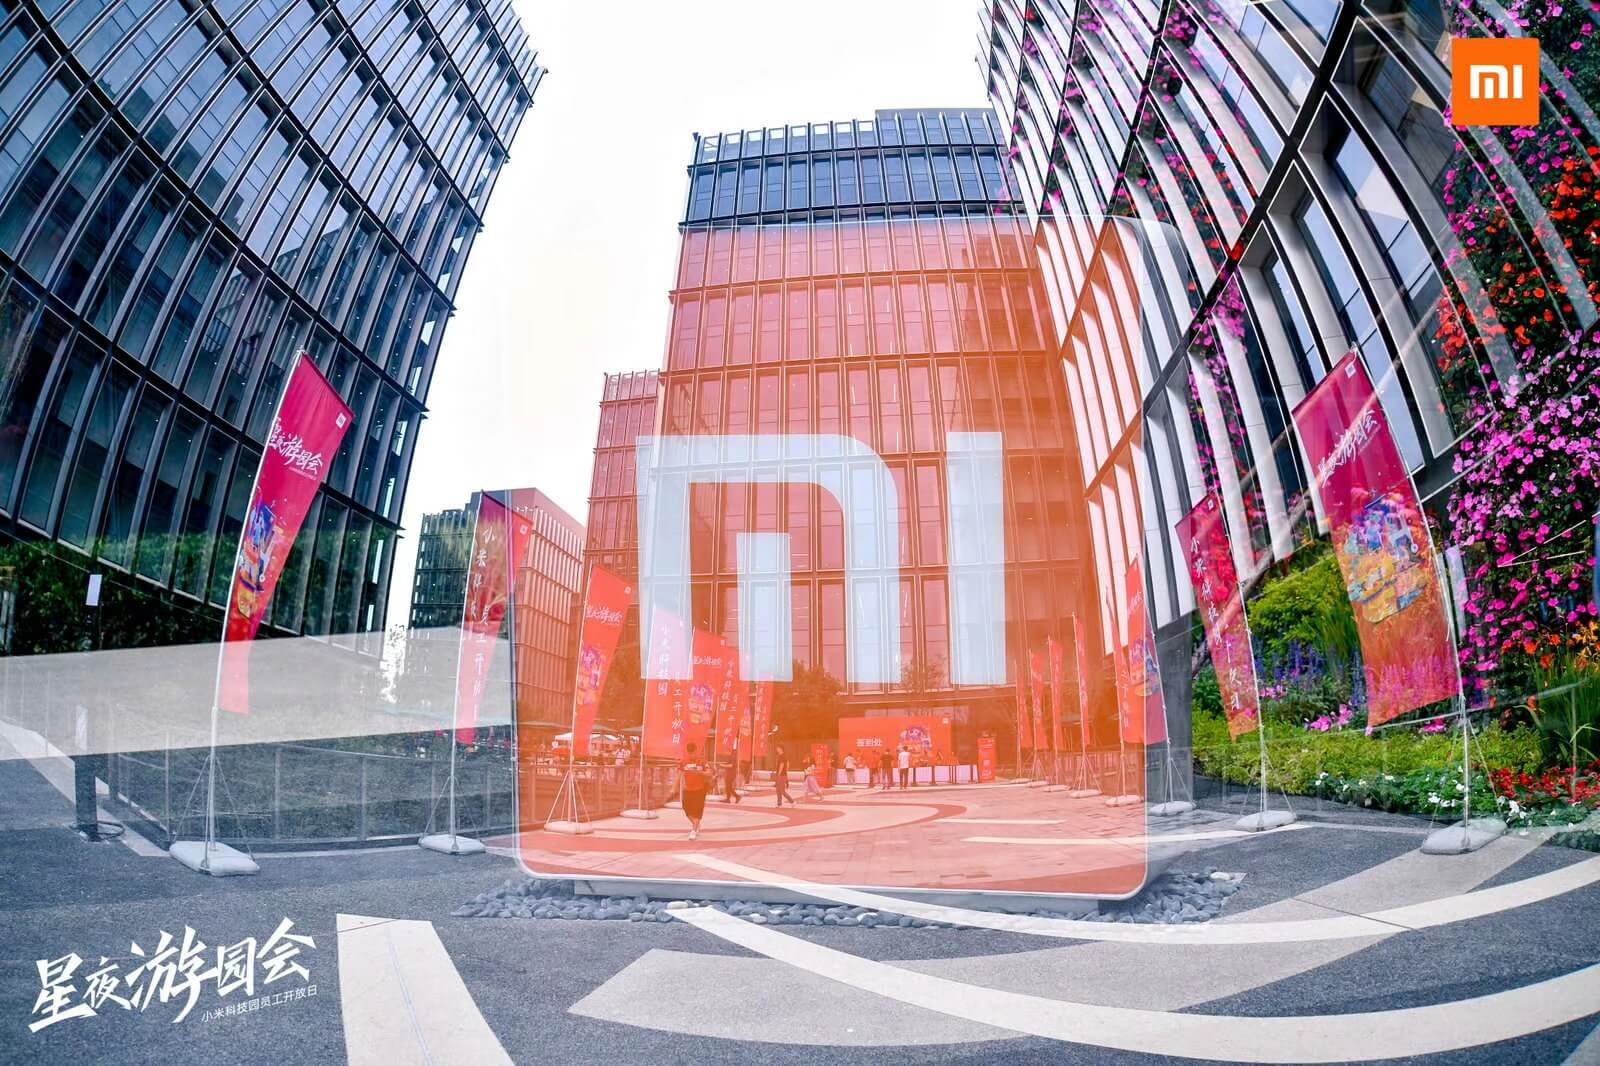 Xiaomi says China sales are close to a full recovery